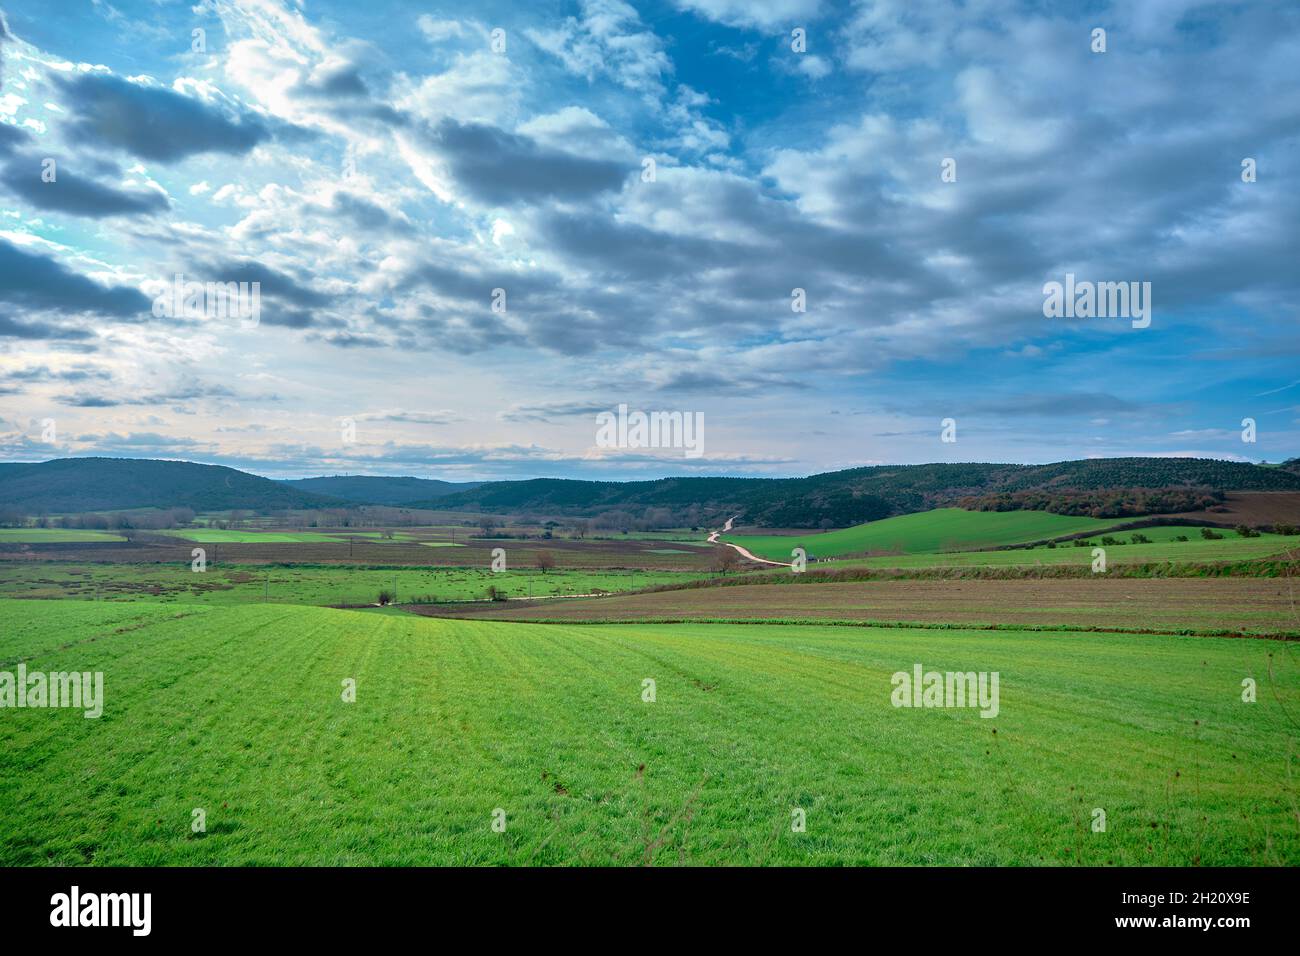 Magnificent Green grass and agricultural fields with small gravel roads far away. Stock Photo